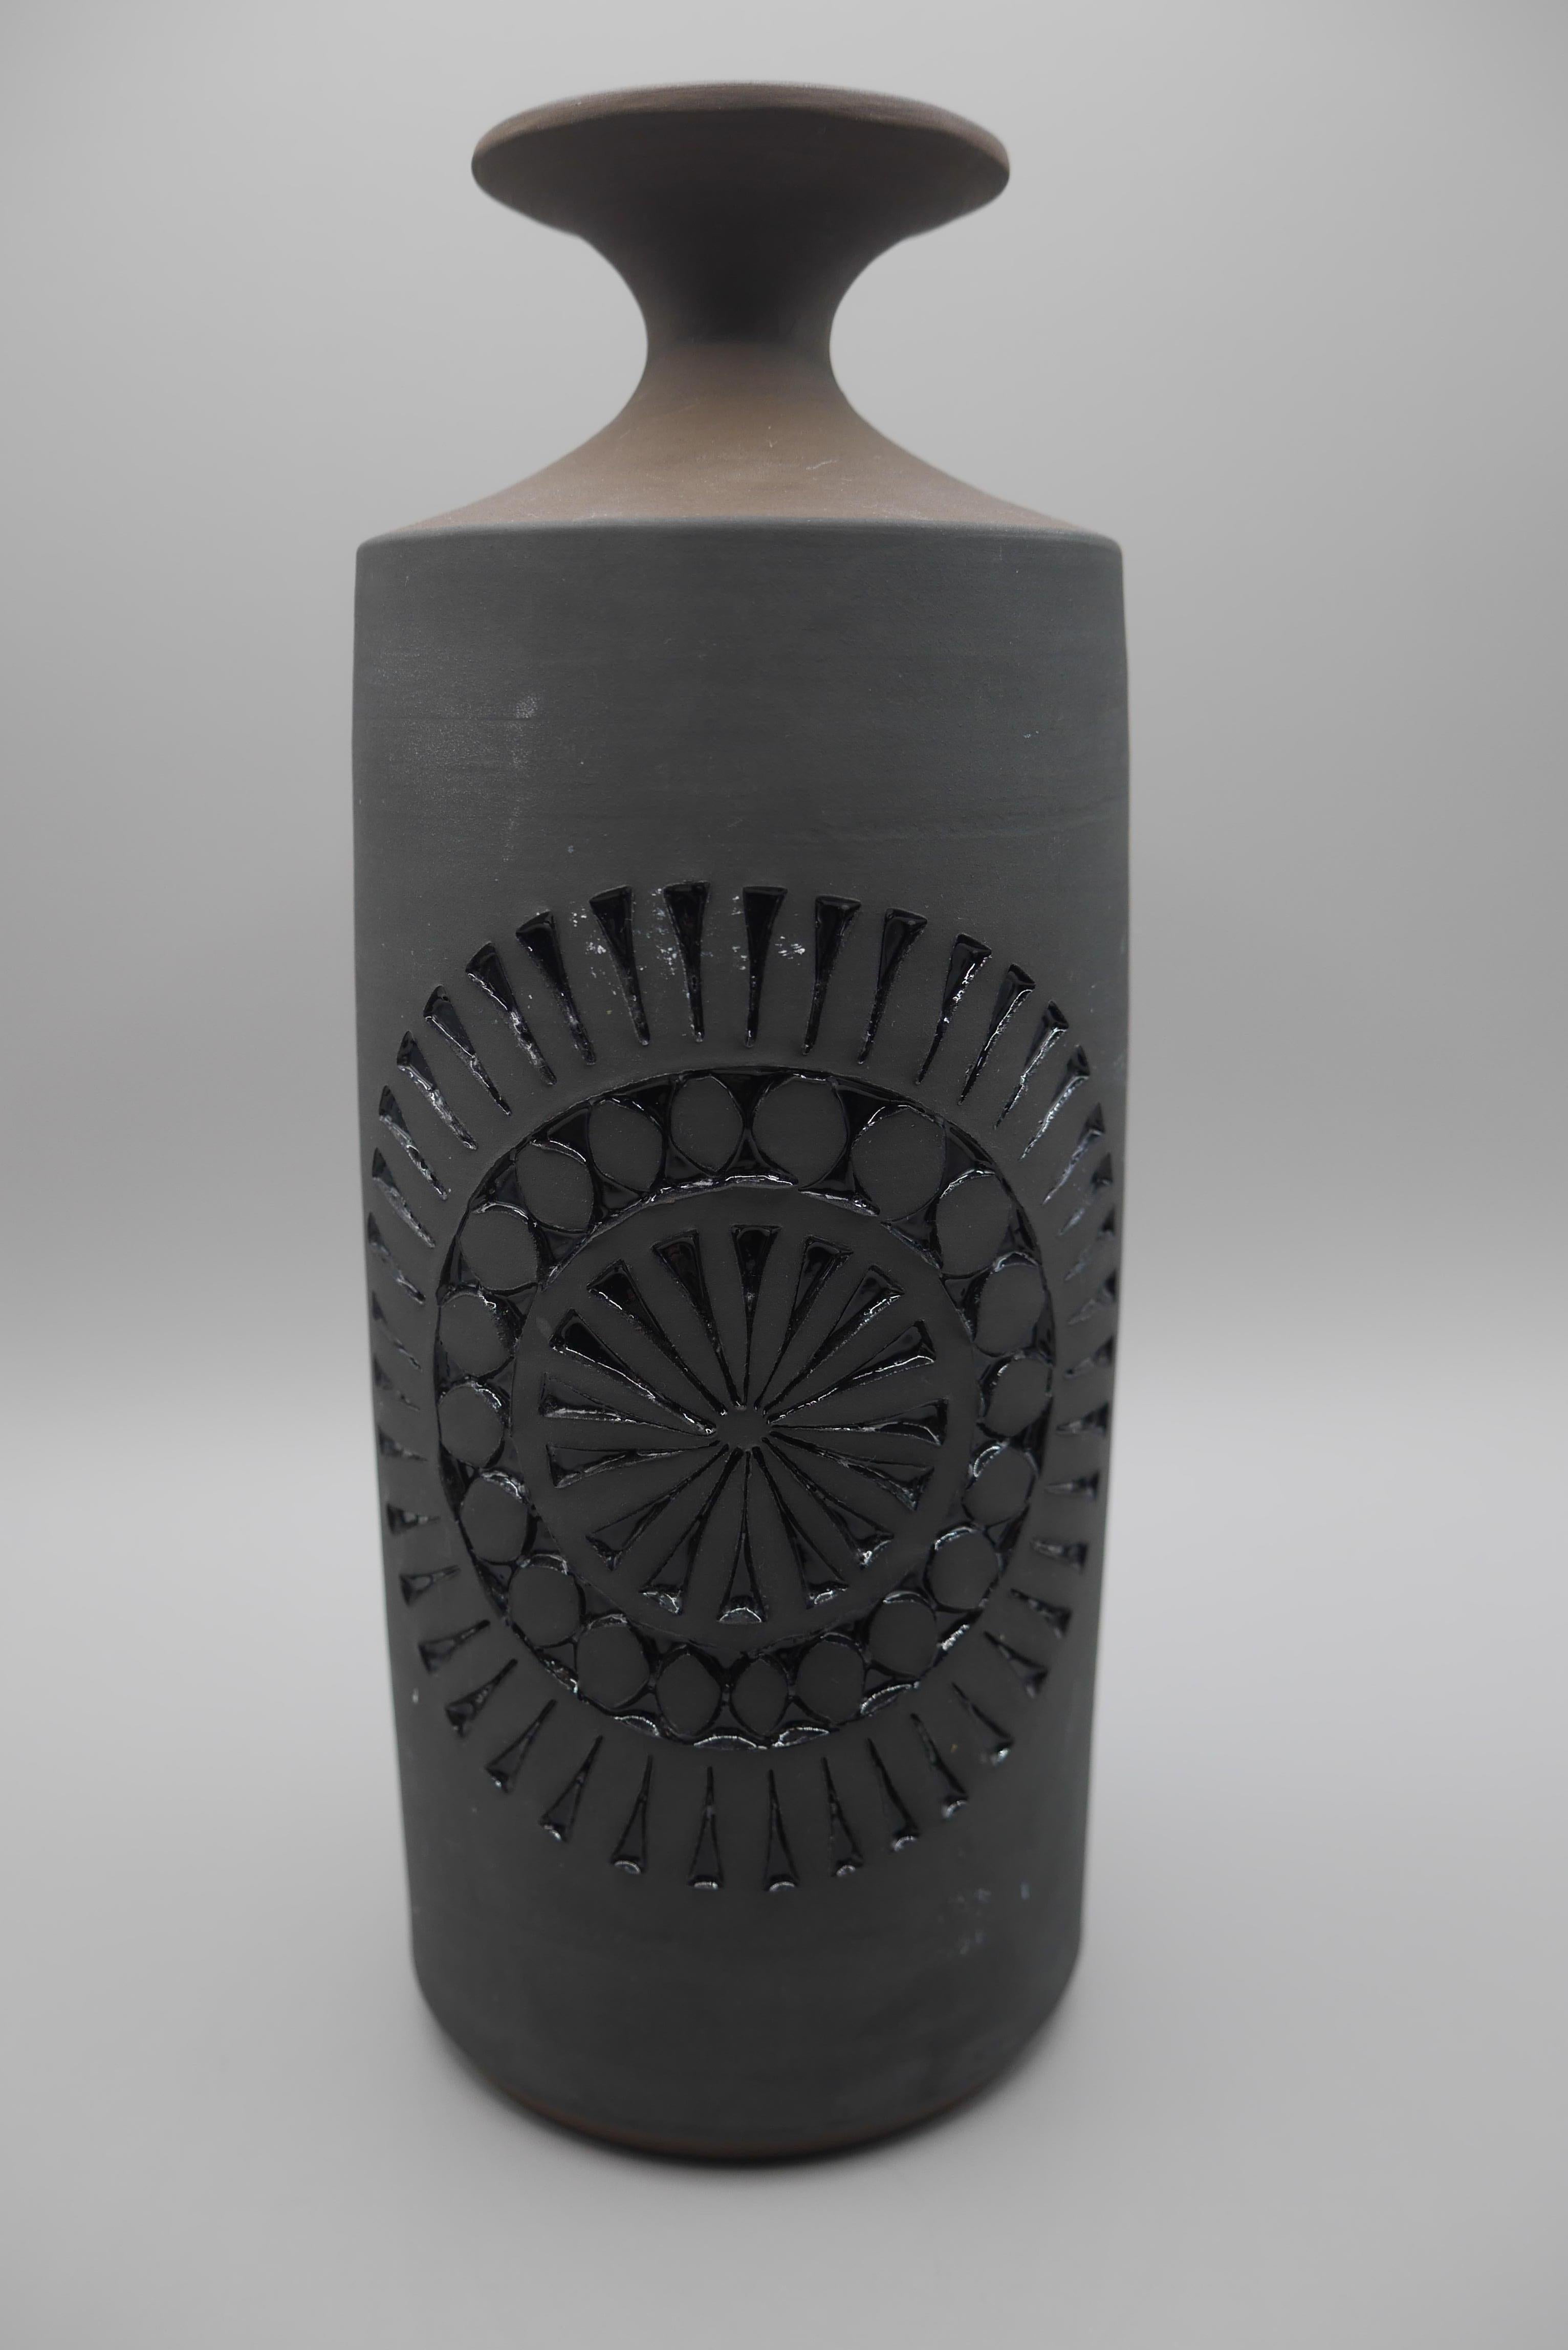 A beautiful, dark and subtle piece by Tomas Anagrius for Alingsås ceramics, Sweden. 

Alingsås Keramik was started in 1947 by Halvard Oldberg and Hilding Canemark. In the beginning, enamel work was a specialty, but they soon turned to the